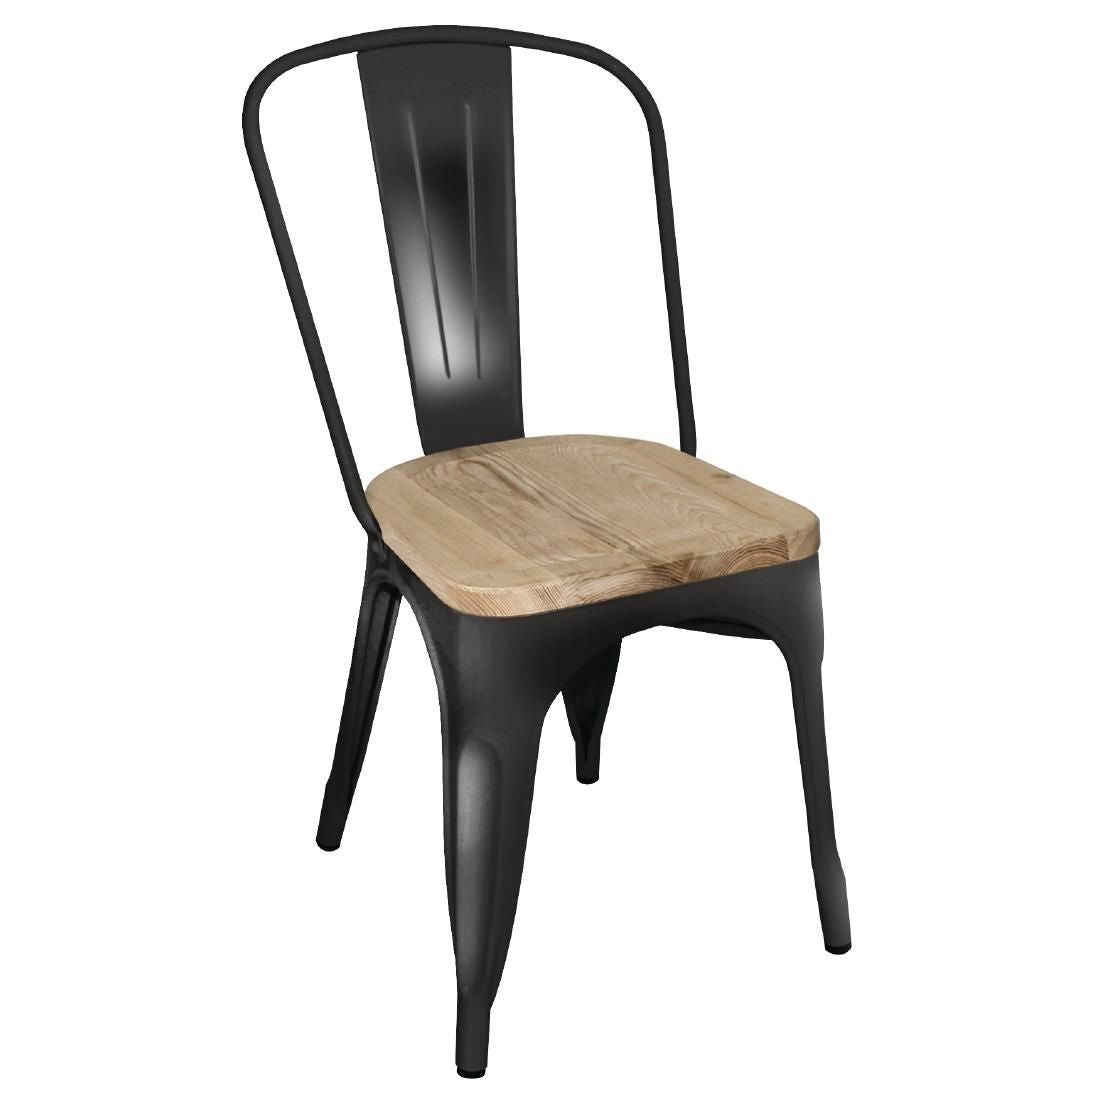 Bolero Bistro Side Chairs with Wooden Seat Pad (Pack of 4) JD Catering Equipment Solutions Ltd